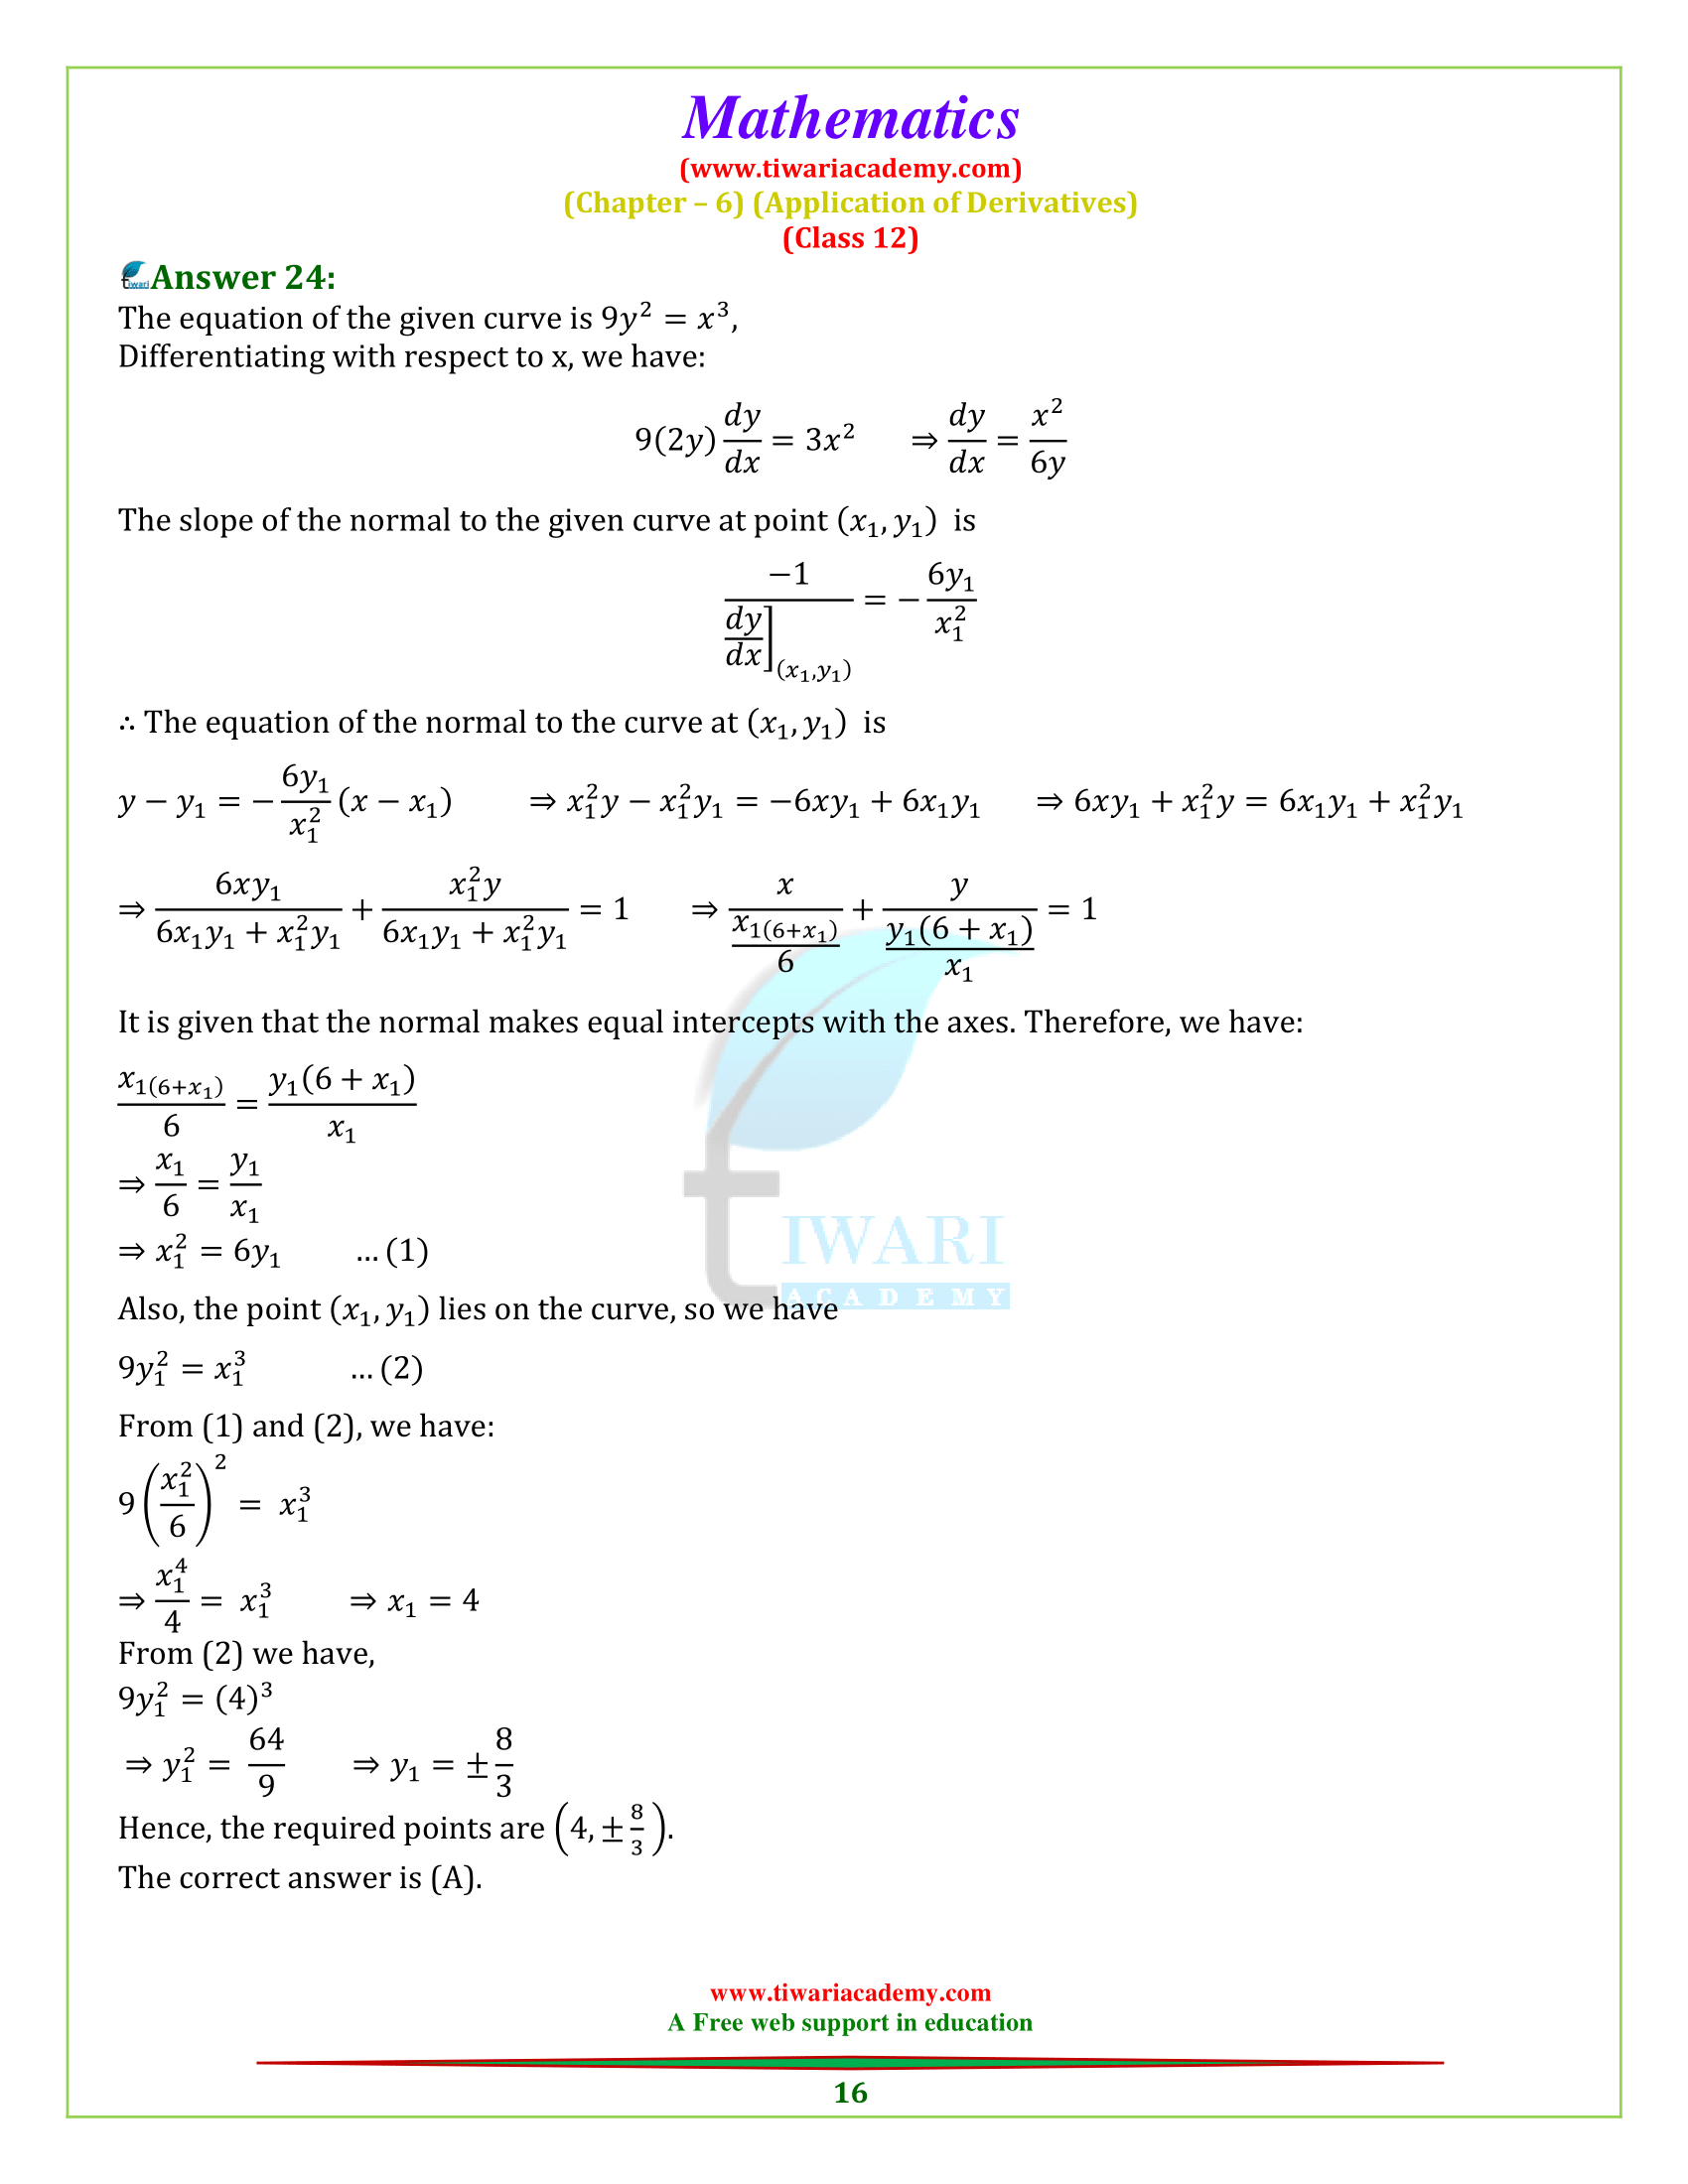 Miscellaneous Exercise 6 solutions class 12